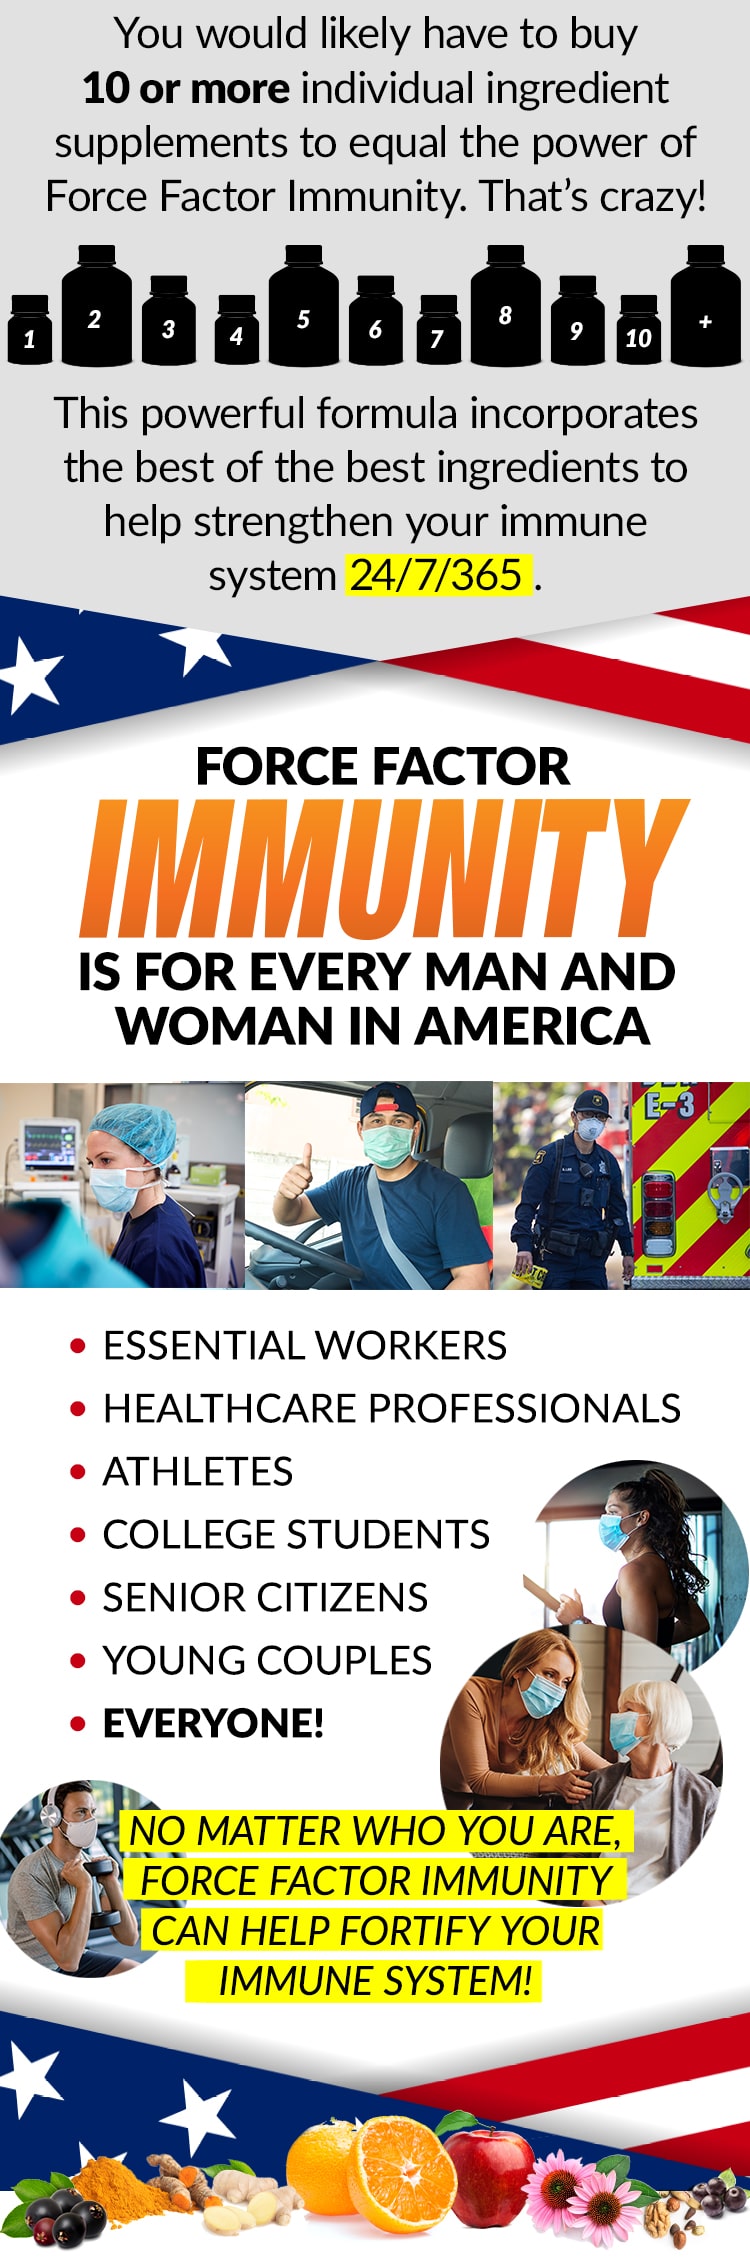 You would likely have to buy 10 or more individual ingredient supplements to equal the power of Force Factor Immunity. That’s crazy! This powerful formula incorporates the best of the best ingredients to help strengthen your immune system 24/7/365. FORCE FACTORY IMMUNITY IS FOR EVERY MAN AND WOMAN IN AMERICA. ESSENTIAL WORKERS, HEALTHCARE PROFESSIONALS, ATHLETES, COLLEGE STUDENTS, SENIOR CITIZENS, YOUNG COUPLES, EVERYONE! NO MATTER WHO YOU ARE, FORCE FACTOR IMMUNITY CAN HELP FORTIFY YOUR IMMUNE SYSTEM!